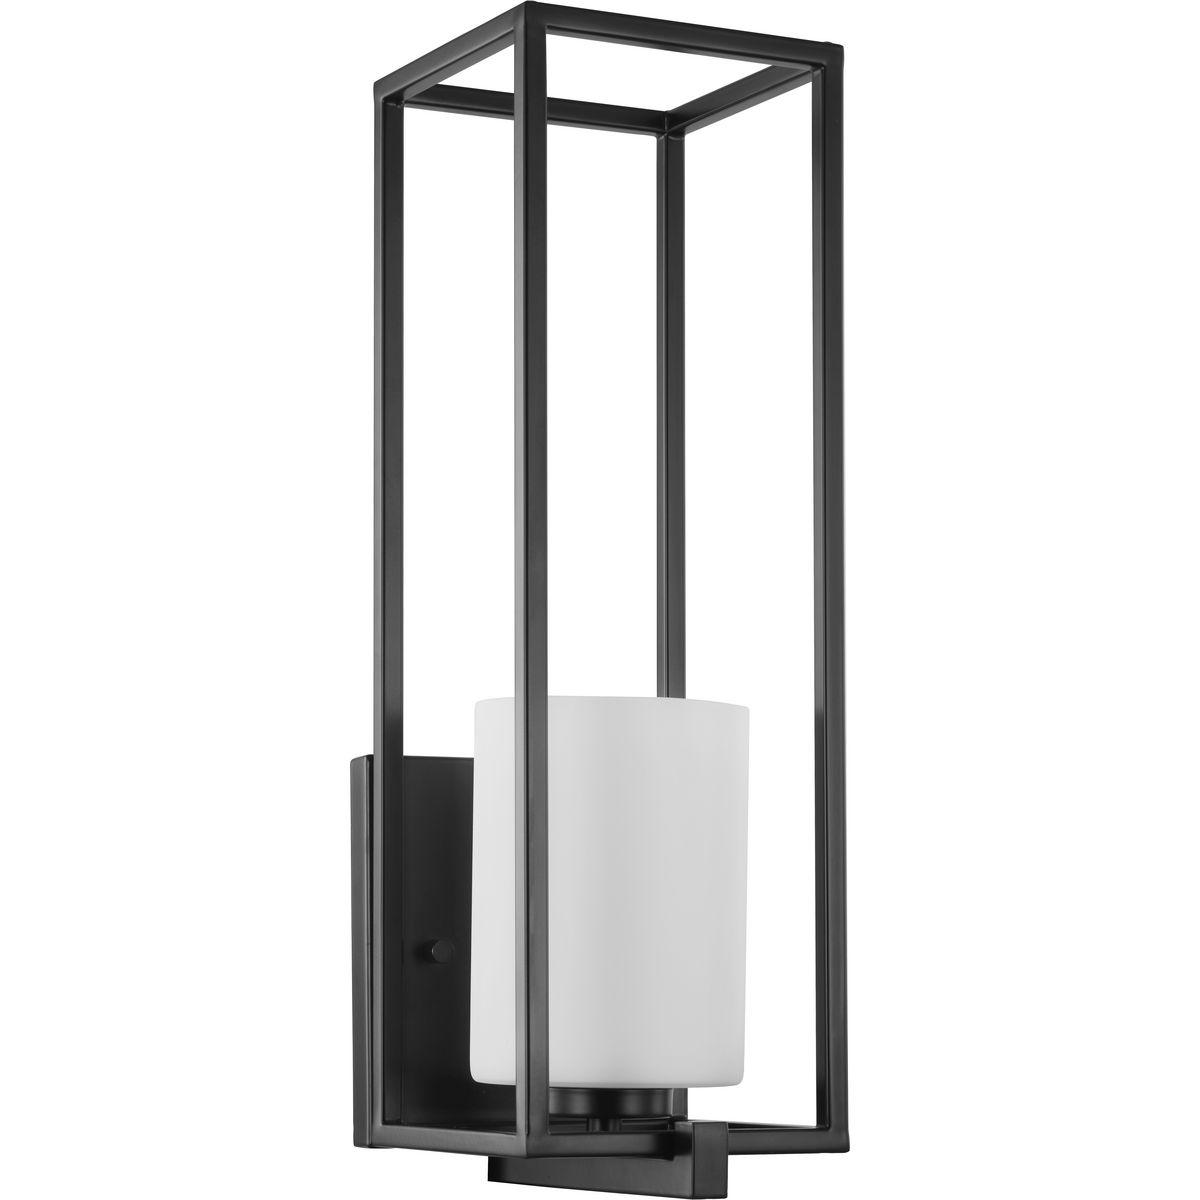 Hubbell P710089-031 Stick with simple geometric forms and clean crisp lines with this modern wall bracket. A beautiful opal glass shade visually calms the sharp edges of the boxy frame in a masterful stroke of design excellence. The frame is coated in a classic black finish 